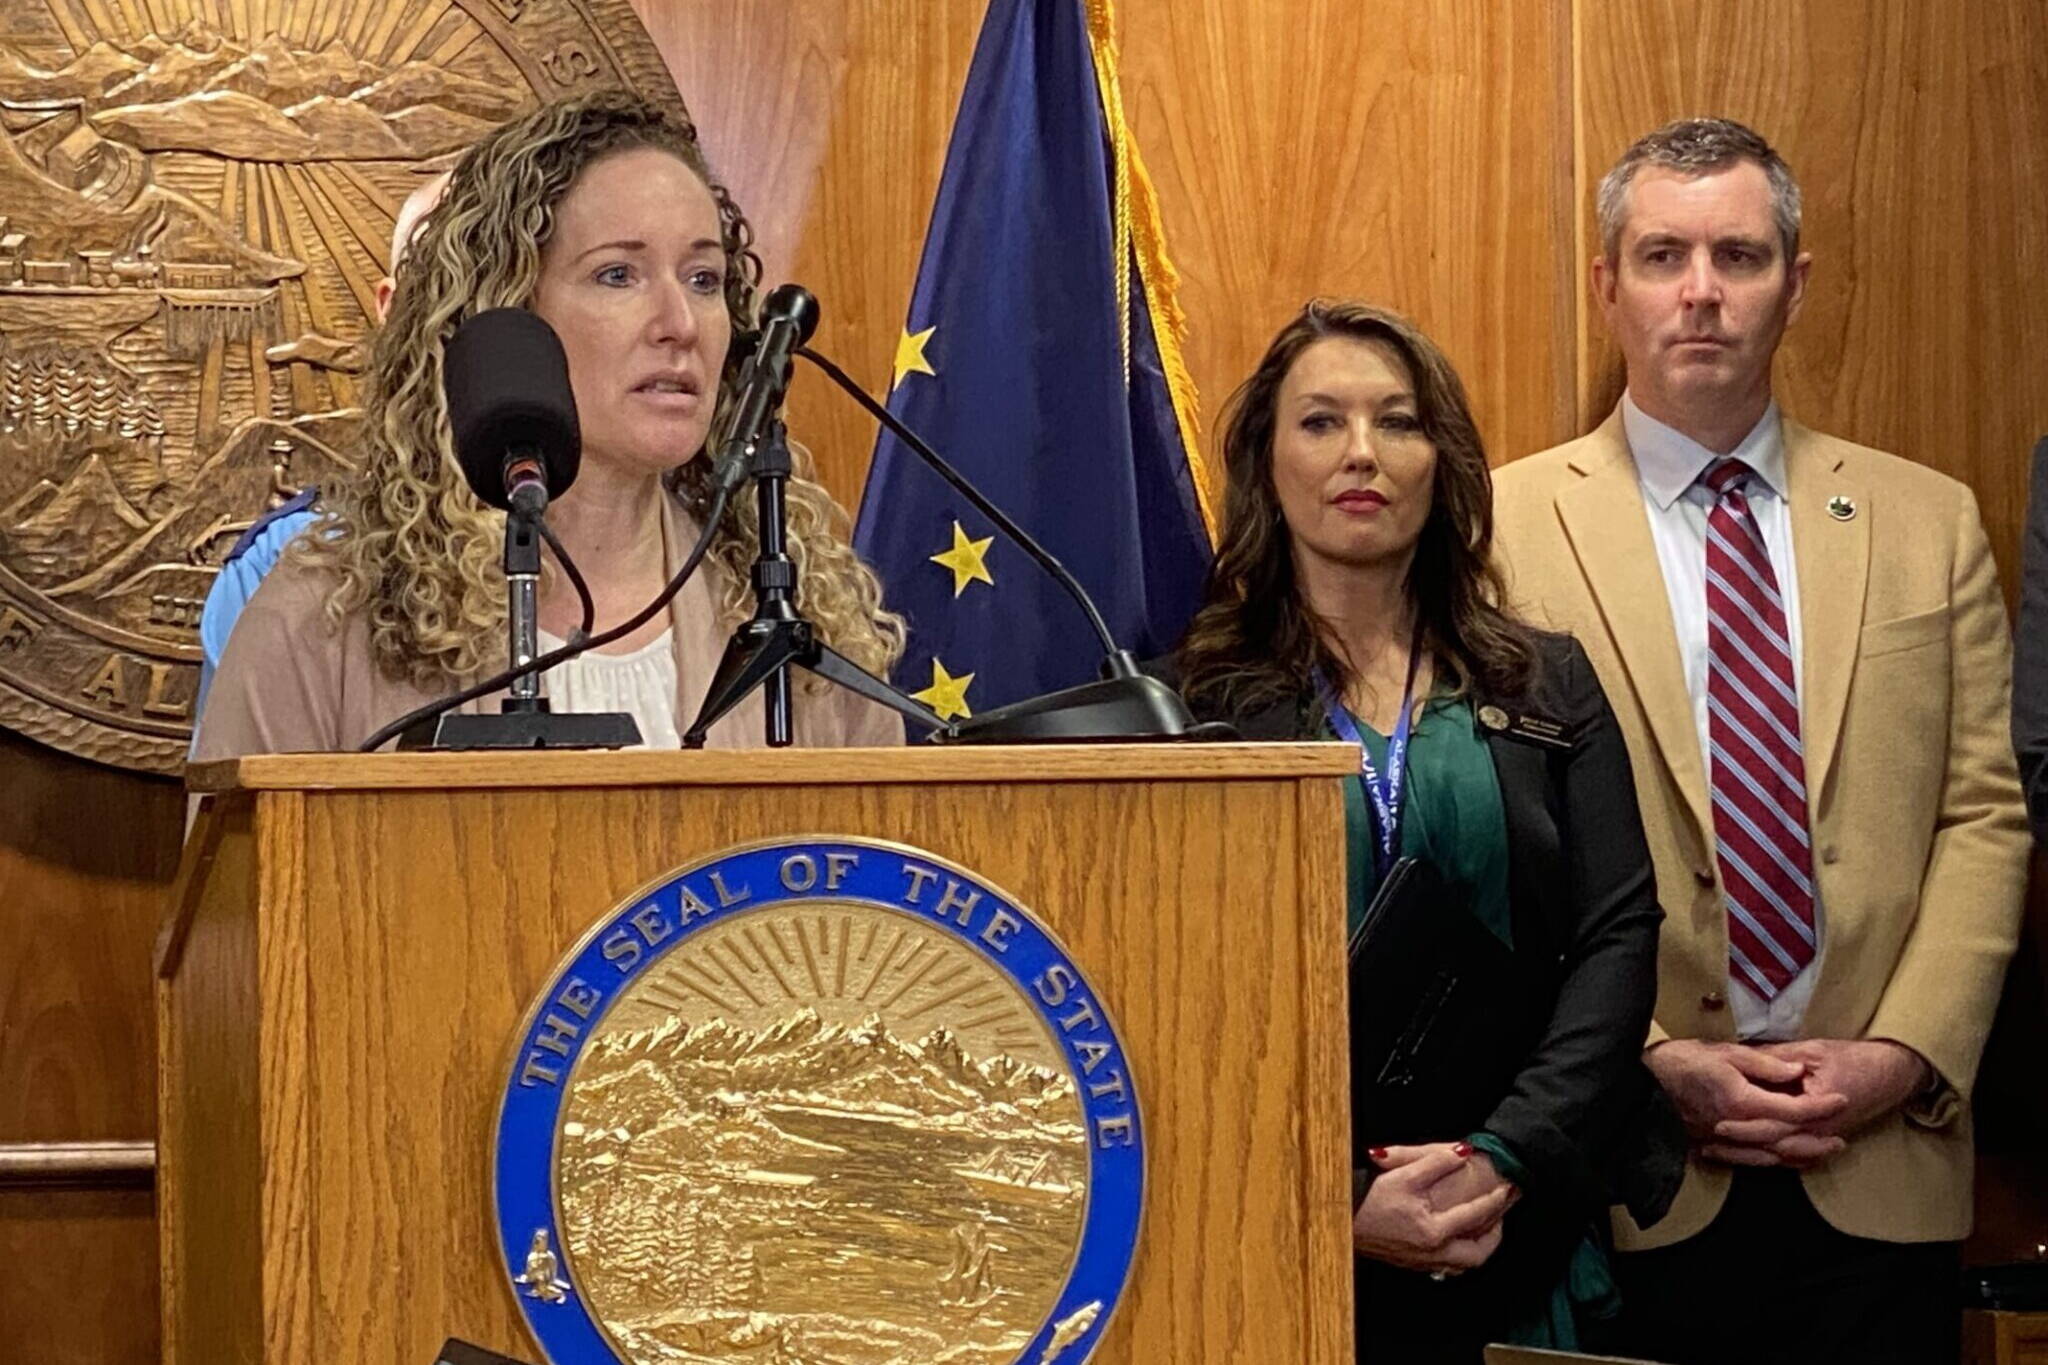 Alaska Department of Health Commissioner Heidi Hedberg gave an update on the backlog of food aid applications in the Division of Public Assistance at a news conference for Gov. Mike Dunleavy’s proposed FY 2025 budget in on Thursday. (Claire Stremple/Alaska Beacon)